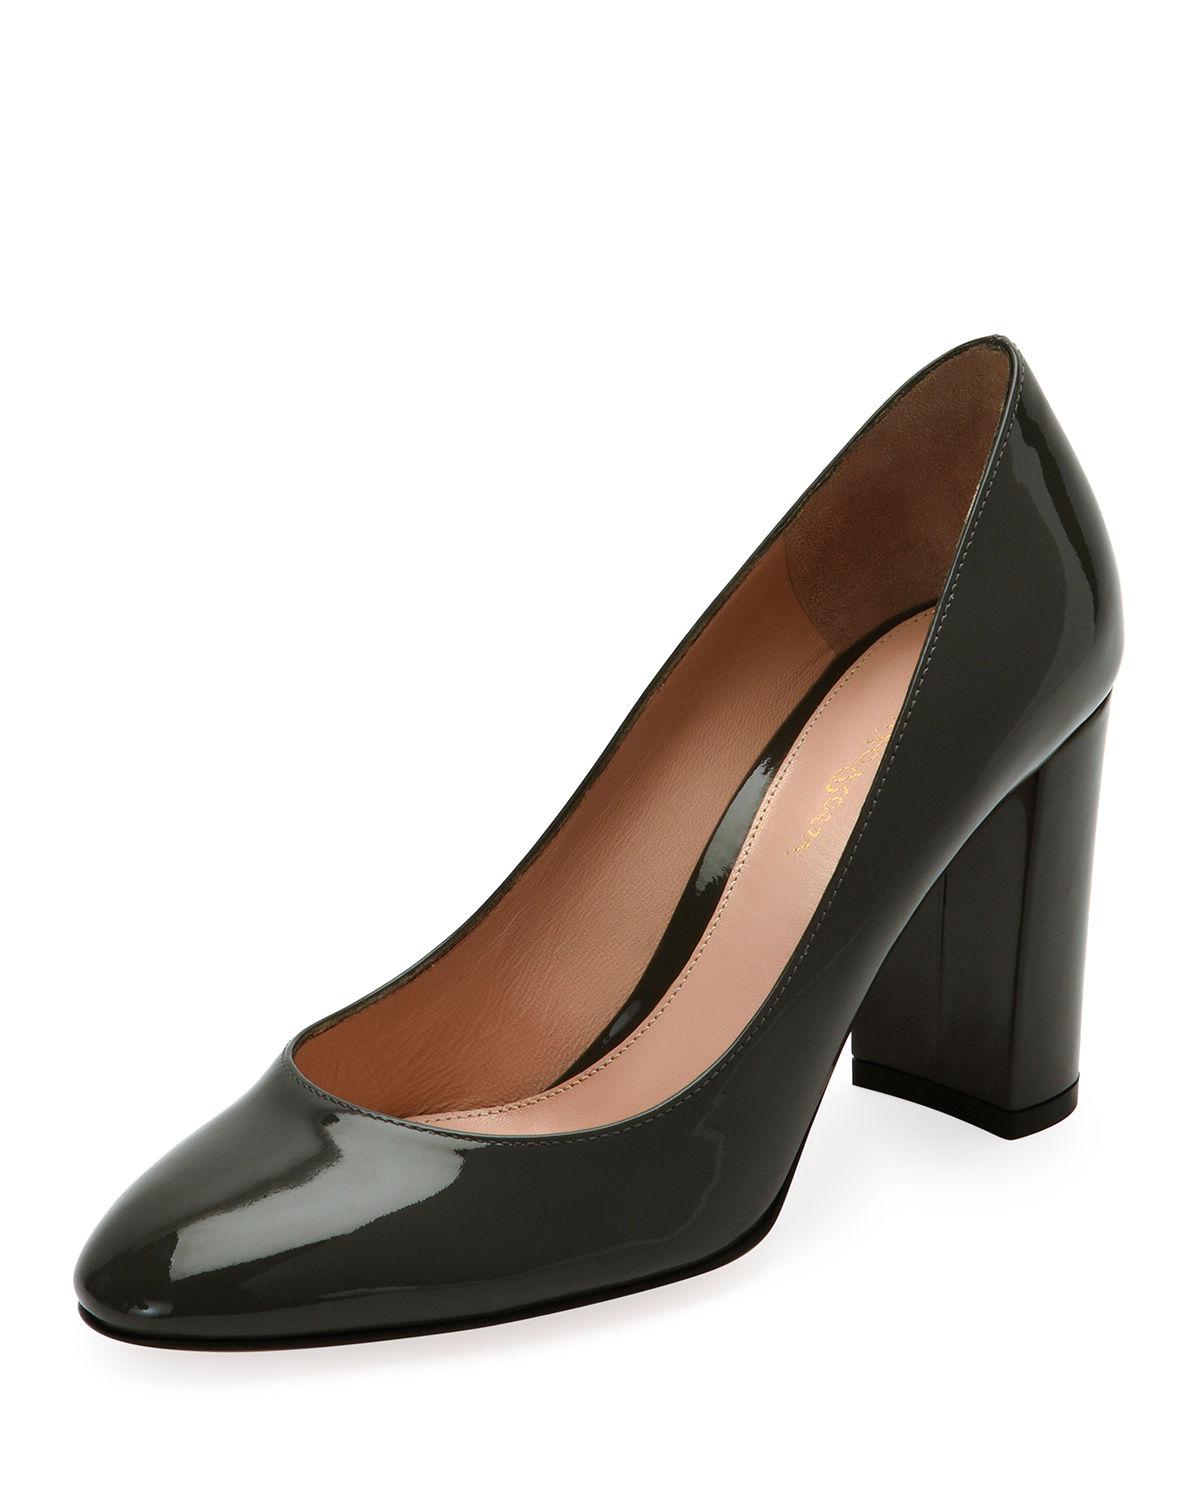 Gianvito Rossi Leather Patent Chunky-heel 85mm Pump in Gray - Lyst